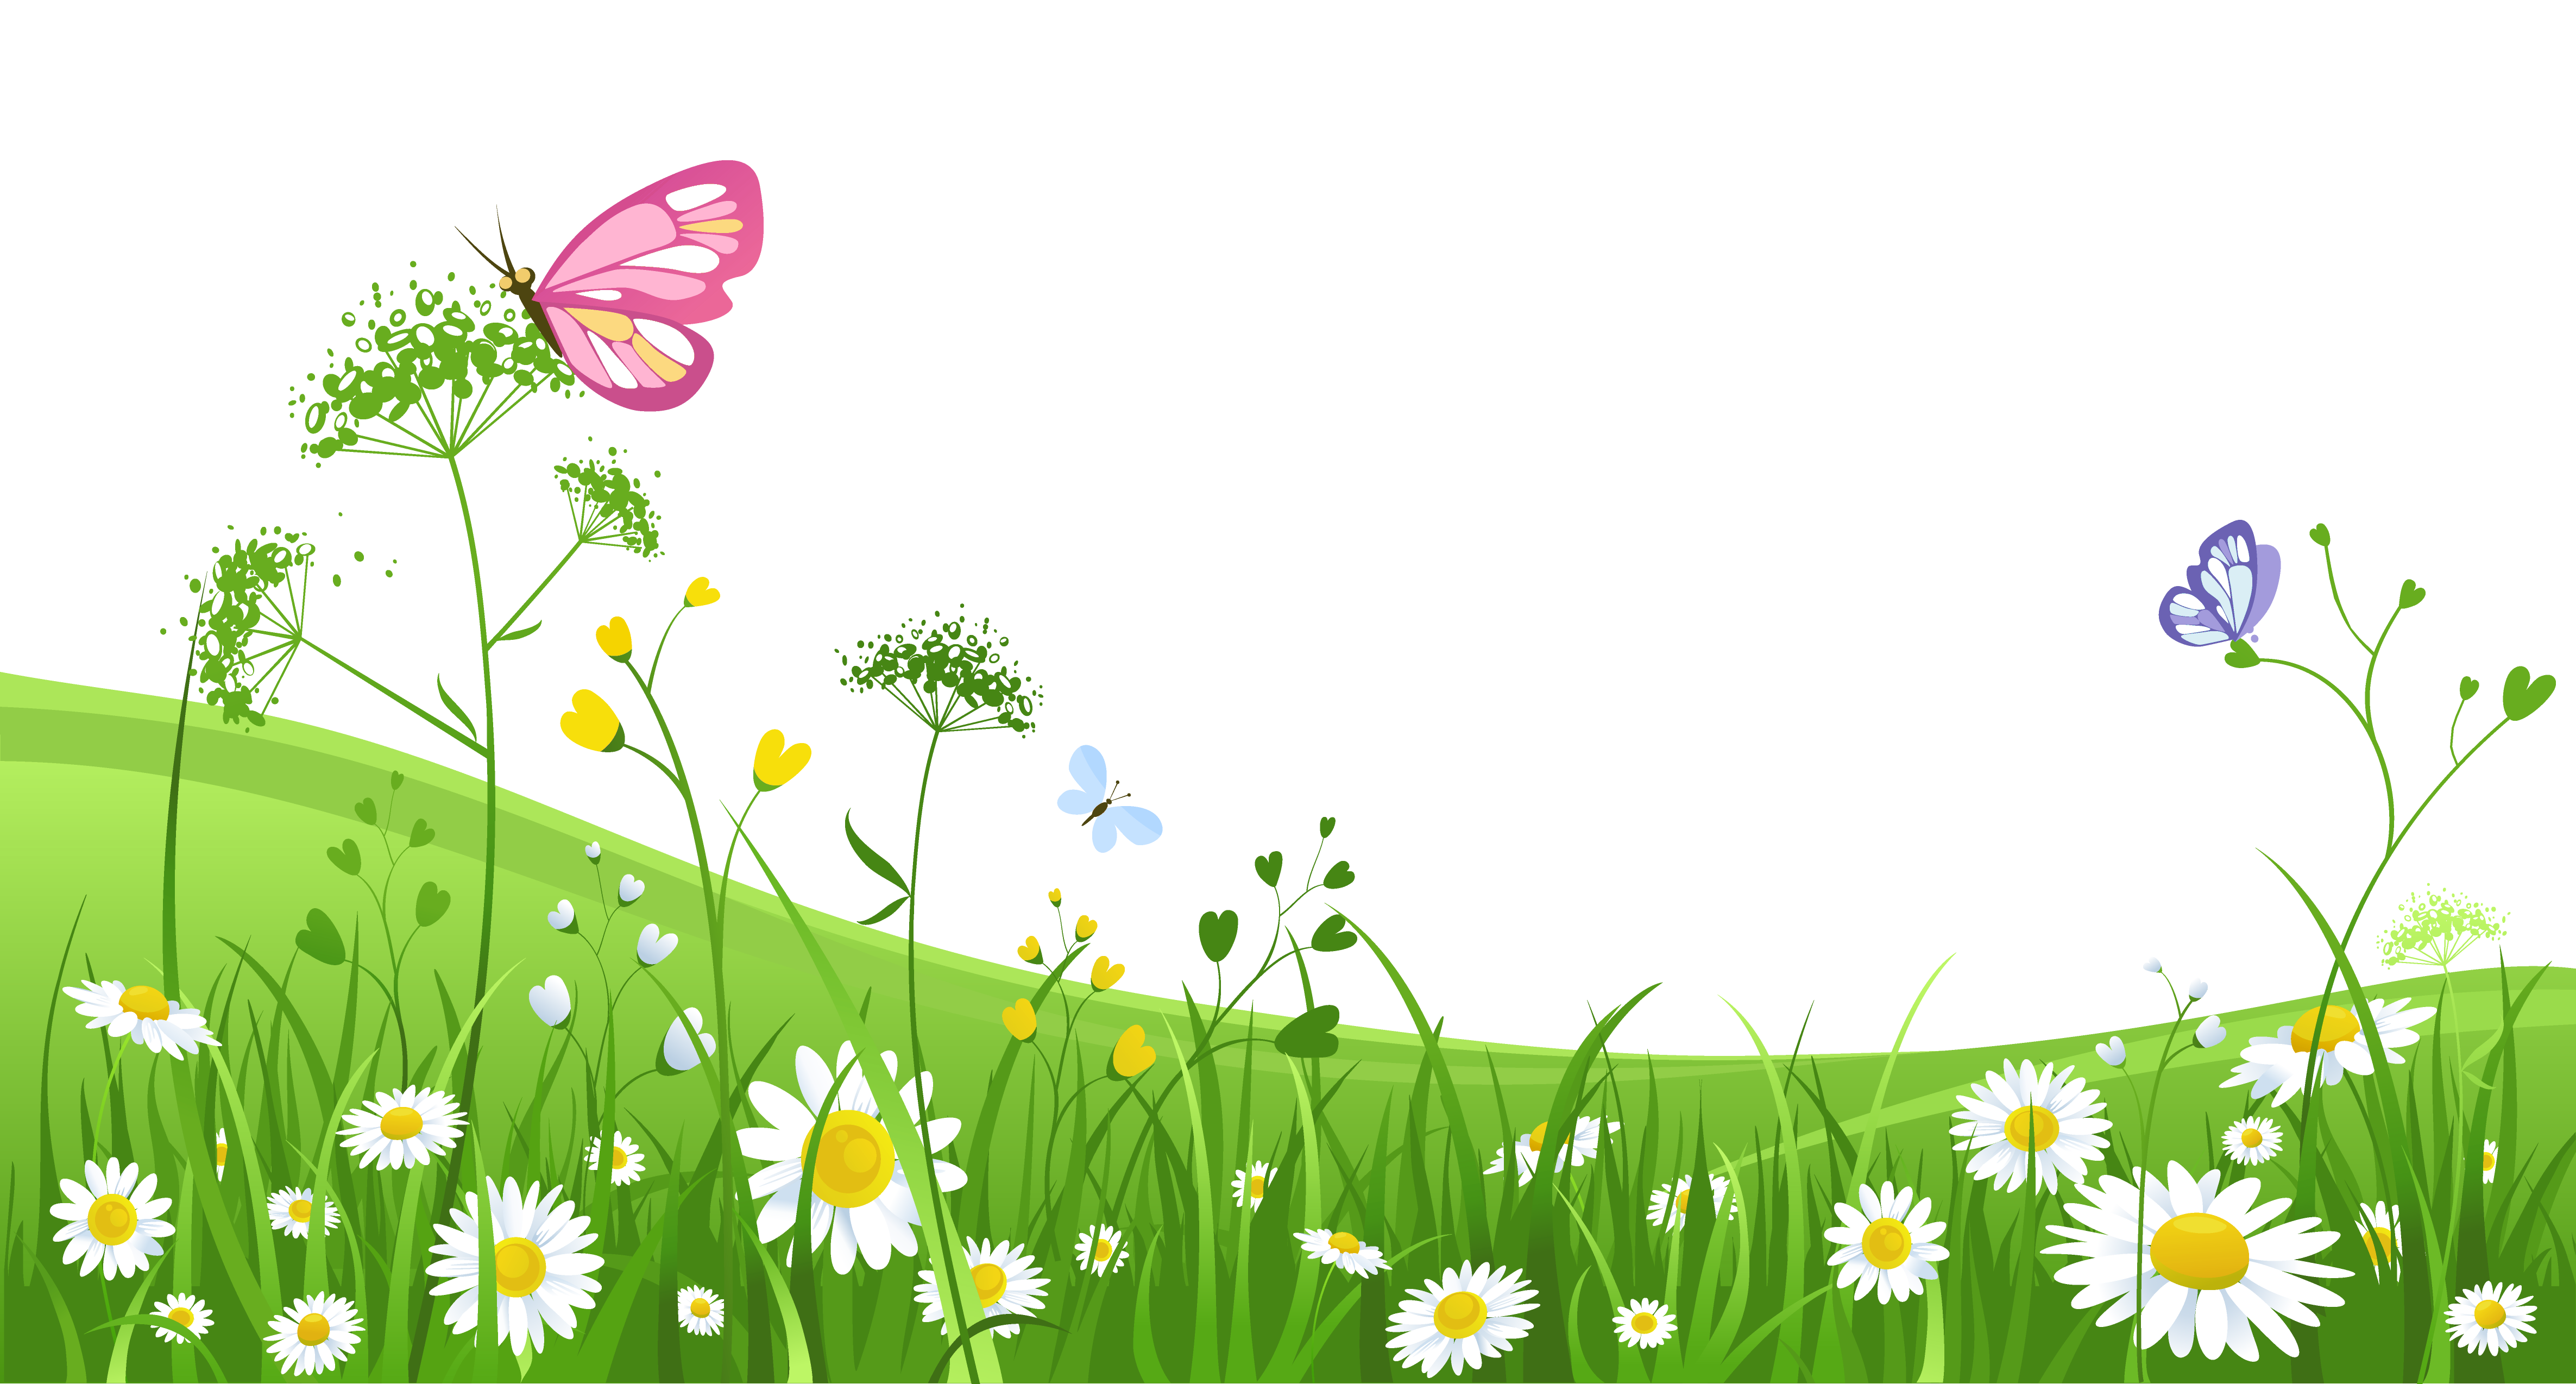 background clipart